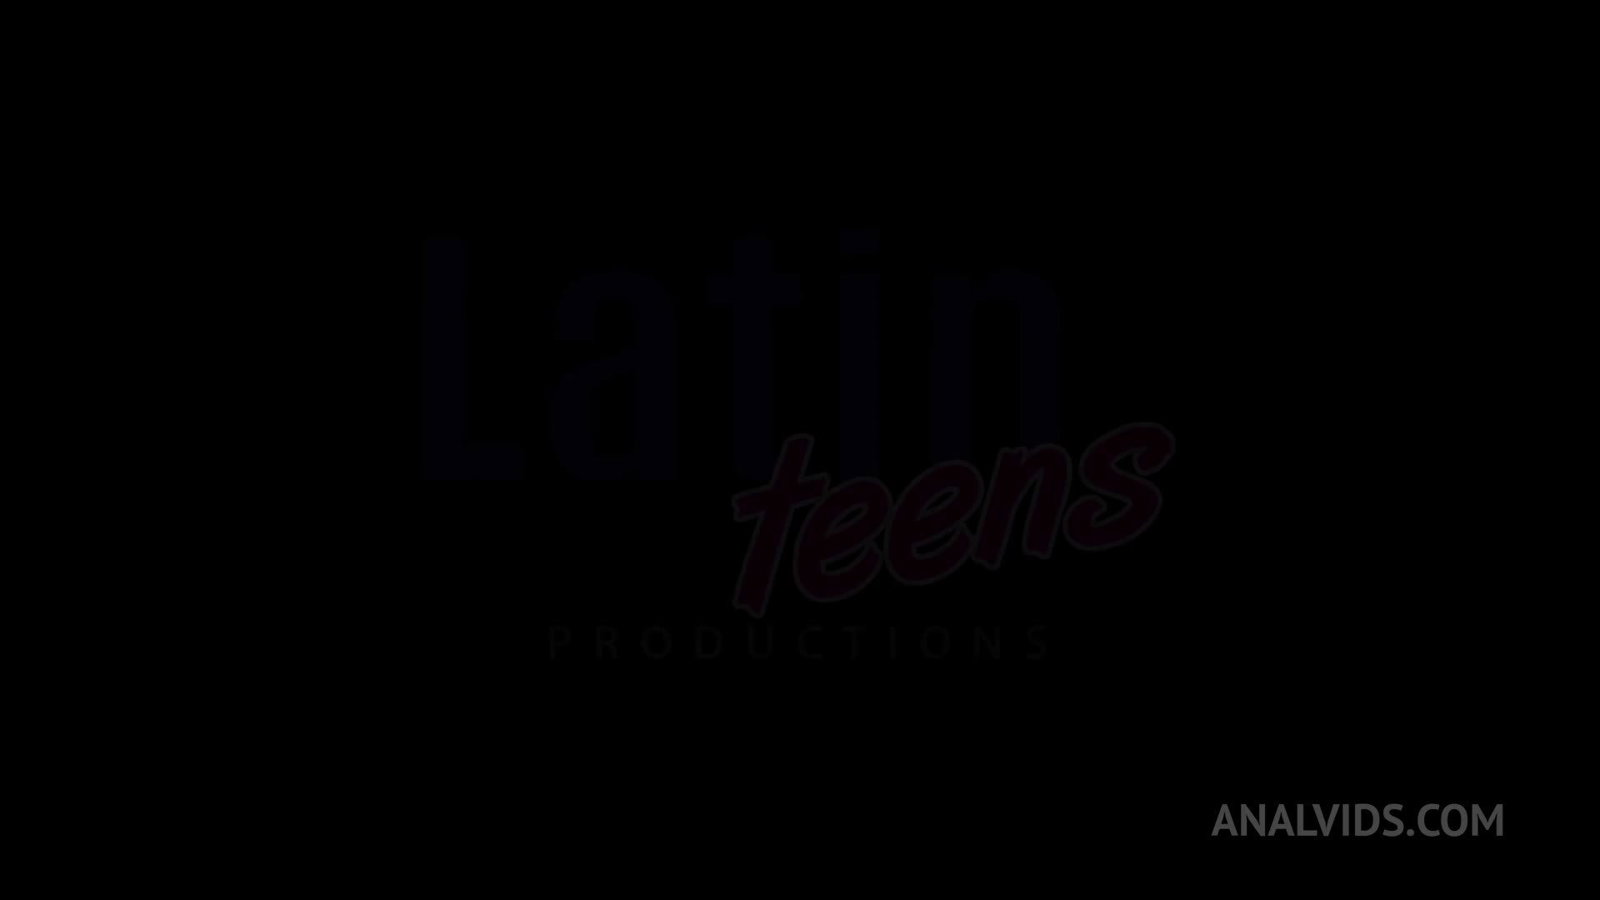 Video by AnalVids with the username @AnalVids, who is a brand user,  September 11, 2022 at 2:05 PM. The post is about the topic Latinas and the text says '3 huge cocks give a hot DP to the beautiful YESSICA BUNNY

#YessicaBunny #Bruno #DavidBander #AlexHard 

🍑 https://sharesome.com/get/YESSICABUNNYHotDP'